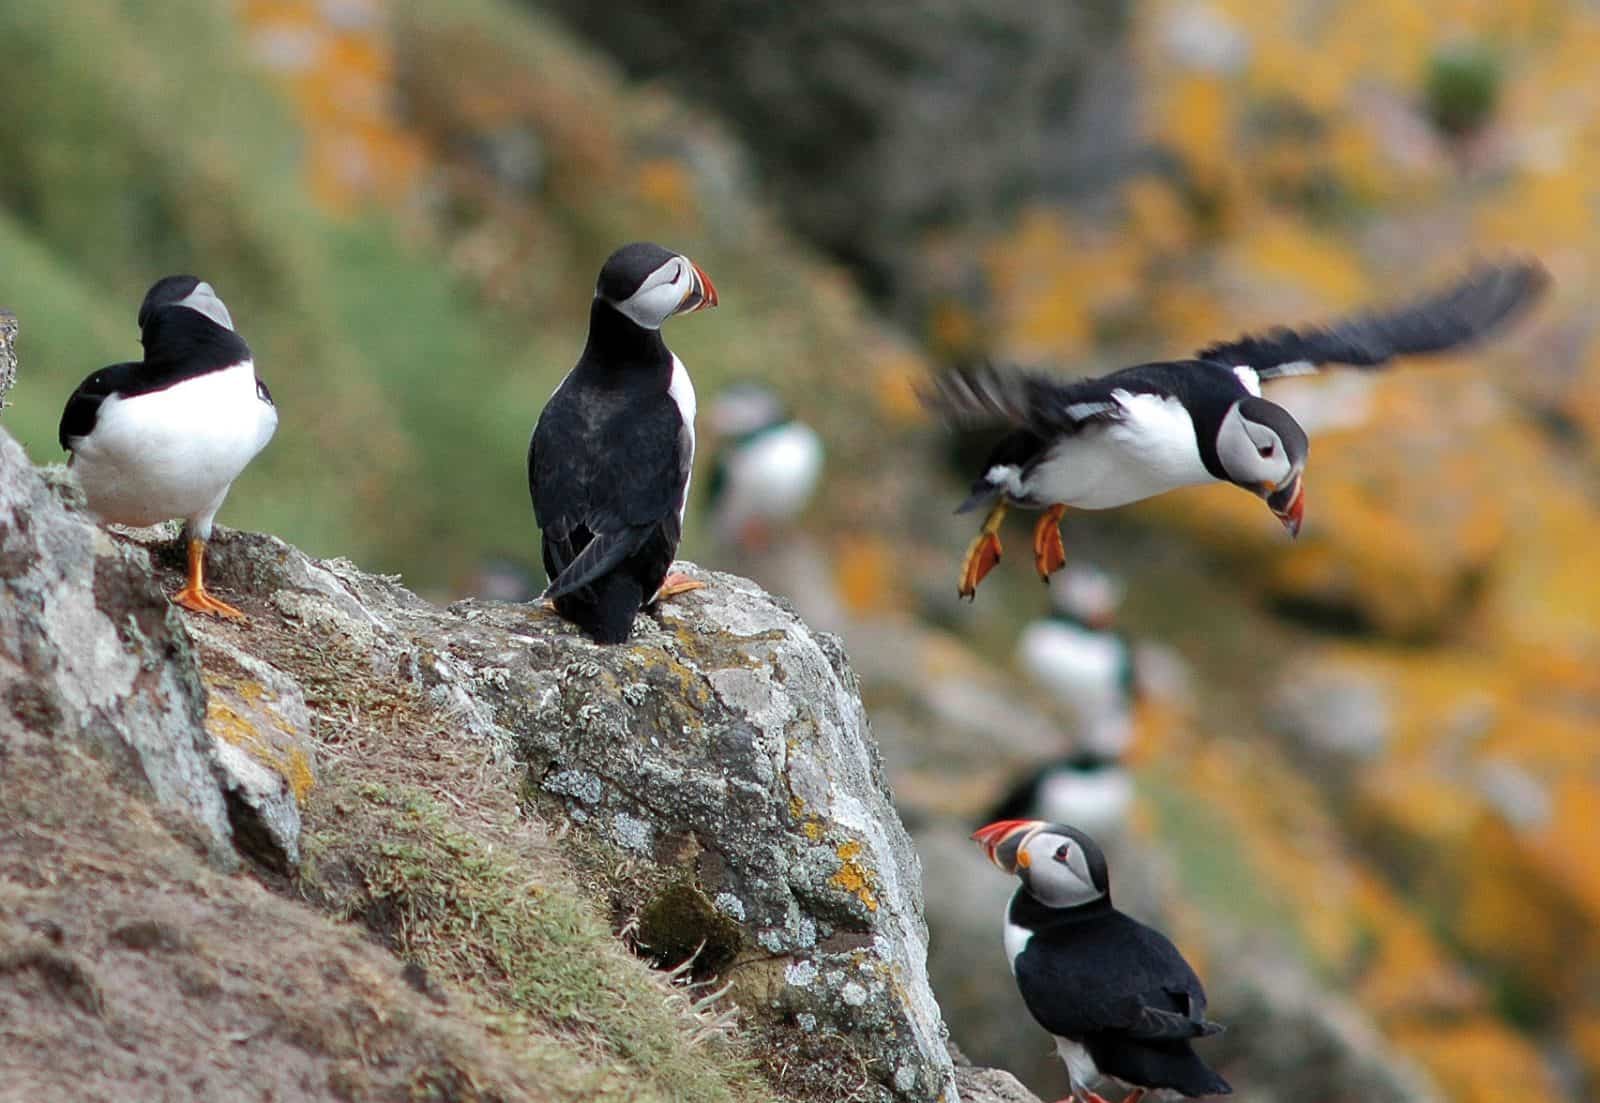 Puffins at the coast